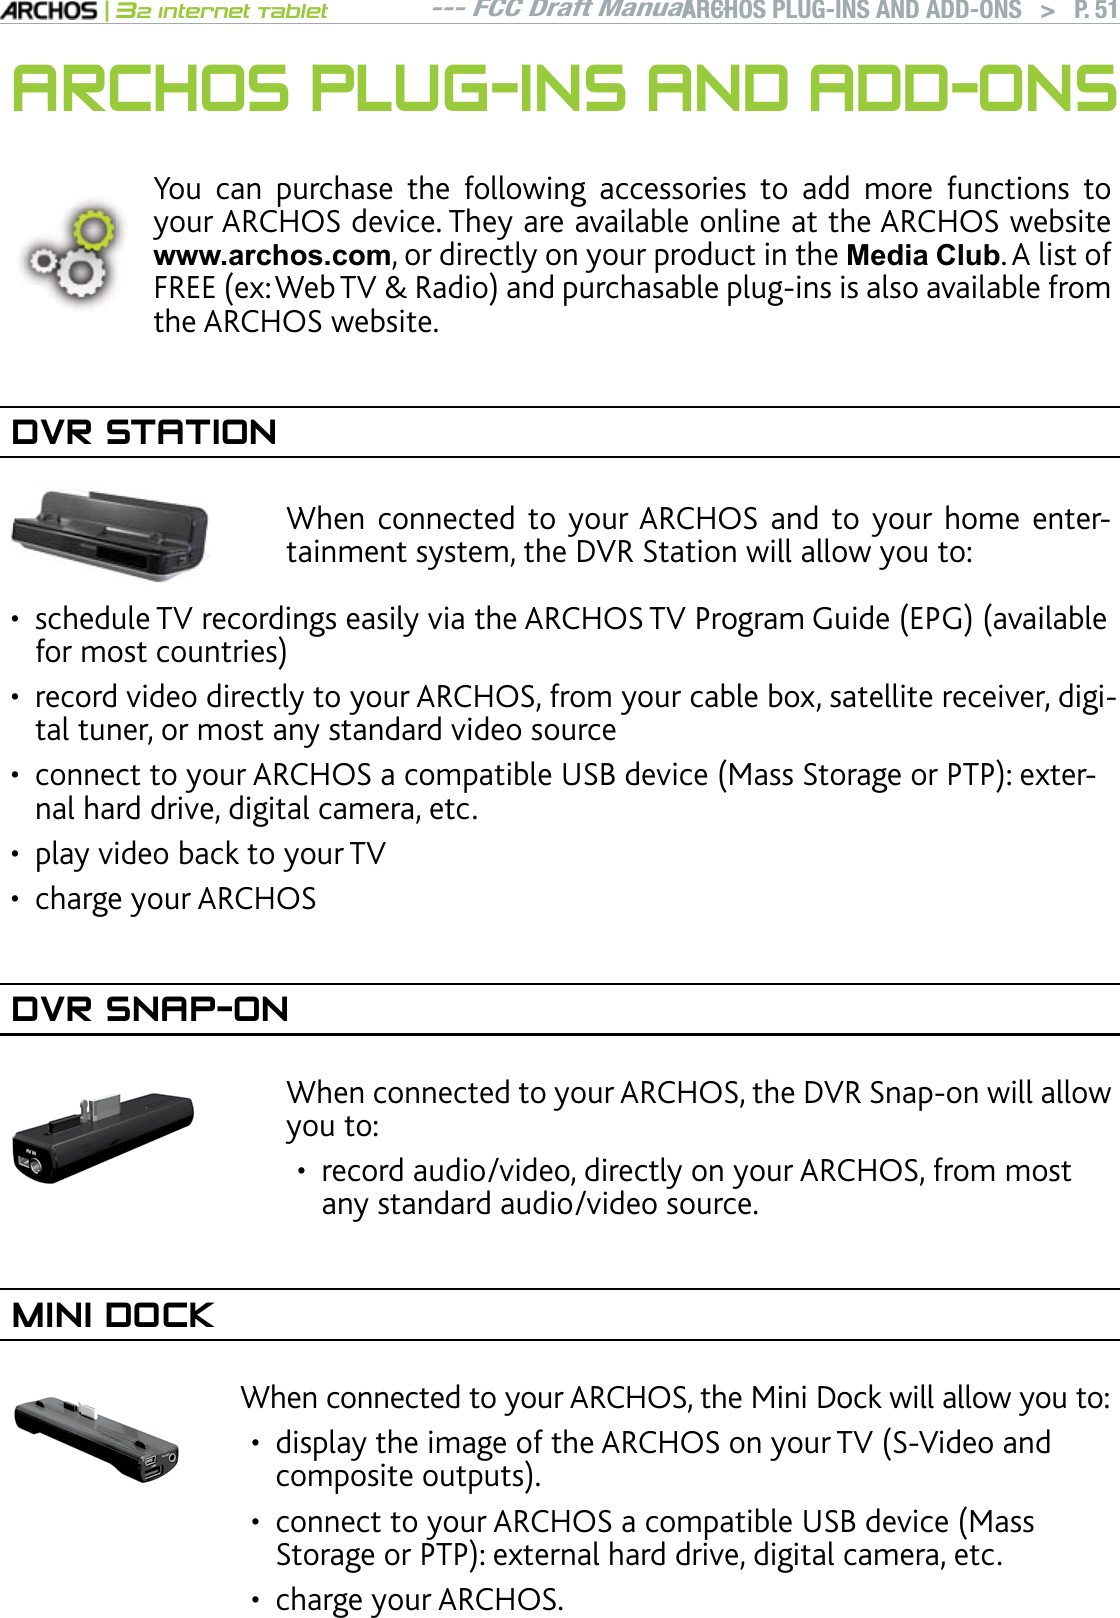 --- FCC Draft Manual ---|32 Internet TabletARCHOS PLUG-INS AND ADD-ONS   &gt; P. 51ARCHOS PLUG-INS AND ADD-ONSYou can purchase the following accessories to add more functions to your ARCHOS device. They are available online at the ARCHOS website ZZZDUFKRVFRP, or directly on your product in the Media Club. A list of FREEGZ9GD684CFKQCPFRWTEJCUCDNGRNWIKPUKUCNUQCXCKNCDNGHTQOthe ARCHOS website.DVR STATIONWhen connected to your ARCHOS and to your home entertainment system, the DVR Station will allow you to:UEJGFWNG68TGEQTFKPIUGCUKN[XKCVJG#4%*15682TQITCO)WKFG&apos;2)CXCKNCDNGHQTOQUVEQWPVTKGUrecord video directly to your ARCHOS, from your cable box, satellite receiver, digital tuner, or most any standard video sourceEQPPGEVVQ[QWT#4%*15CEQORCVKDNG75$FGXKEG/CUU5VQTCIGQT262GZVGTnal hard drive, digital camera, etc.play video back to your TVcharge your ARCHOSDVR SNAP-ON9JGPEQPPGEVGFVQ[QWT#4%*15VJG&amp;845PCRQPYKNNCNNQYyou to: record audio/video, directly on your ARCHOS, from most any standard audio/video source.•MINI DOCKWhen connected to your ARCHOS, the Mini Dock will allow you to: FKURNC[VJGKOCIGQHVJG#4%*15QP[QWT6858KFGQCPFEQORQUKVGQWVRWVUEQPPGEVVQ[QWT#4%*15CEQORCVKDNG75$FGXKEG/CUU5VQTCIGQT262GZVGTPCNJCTFFTKXGFKIKVCNECOGTCGVEcharge your ARCHOS.••••••••